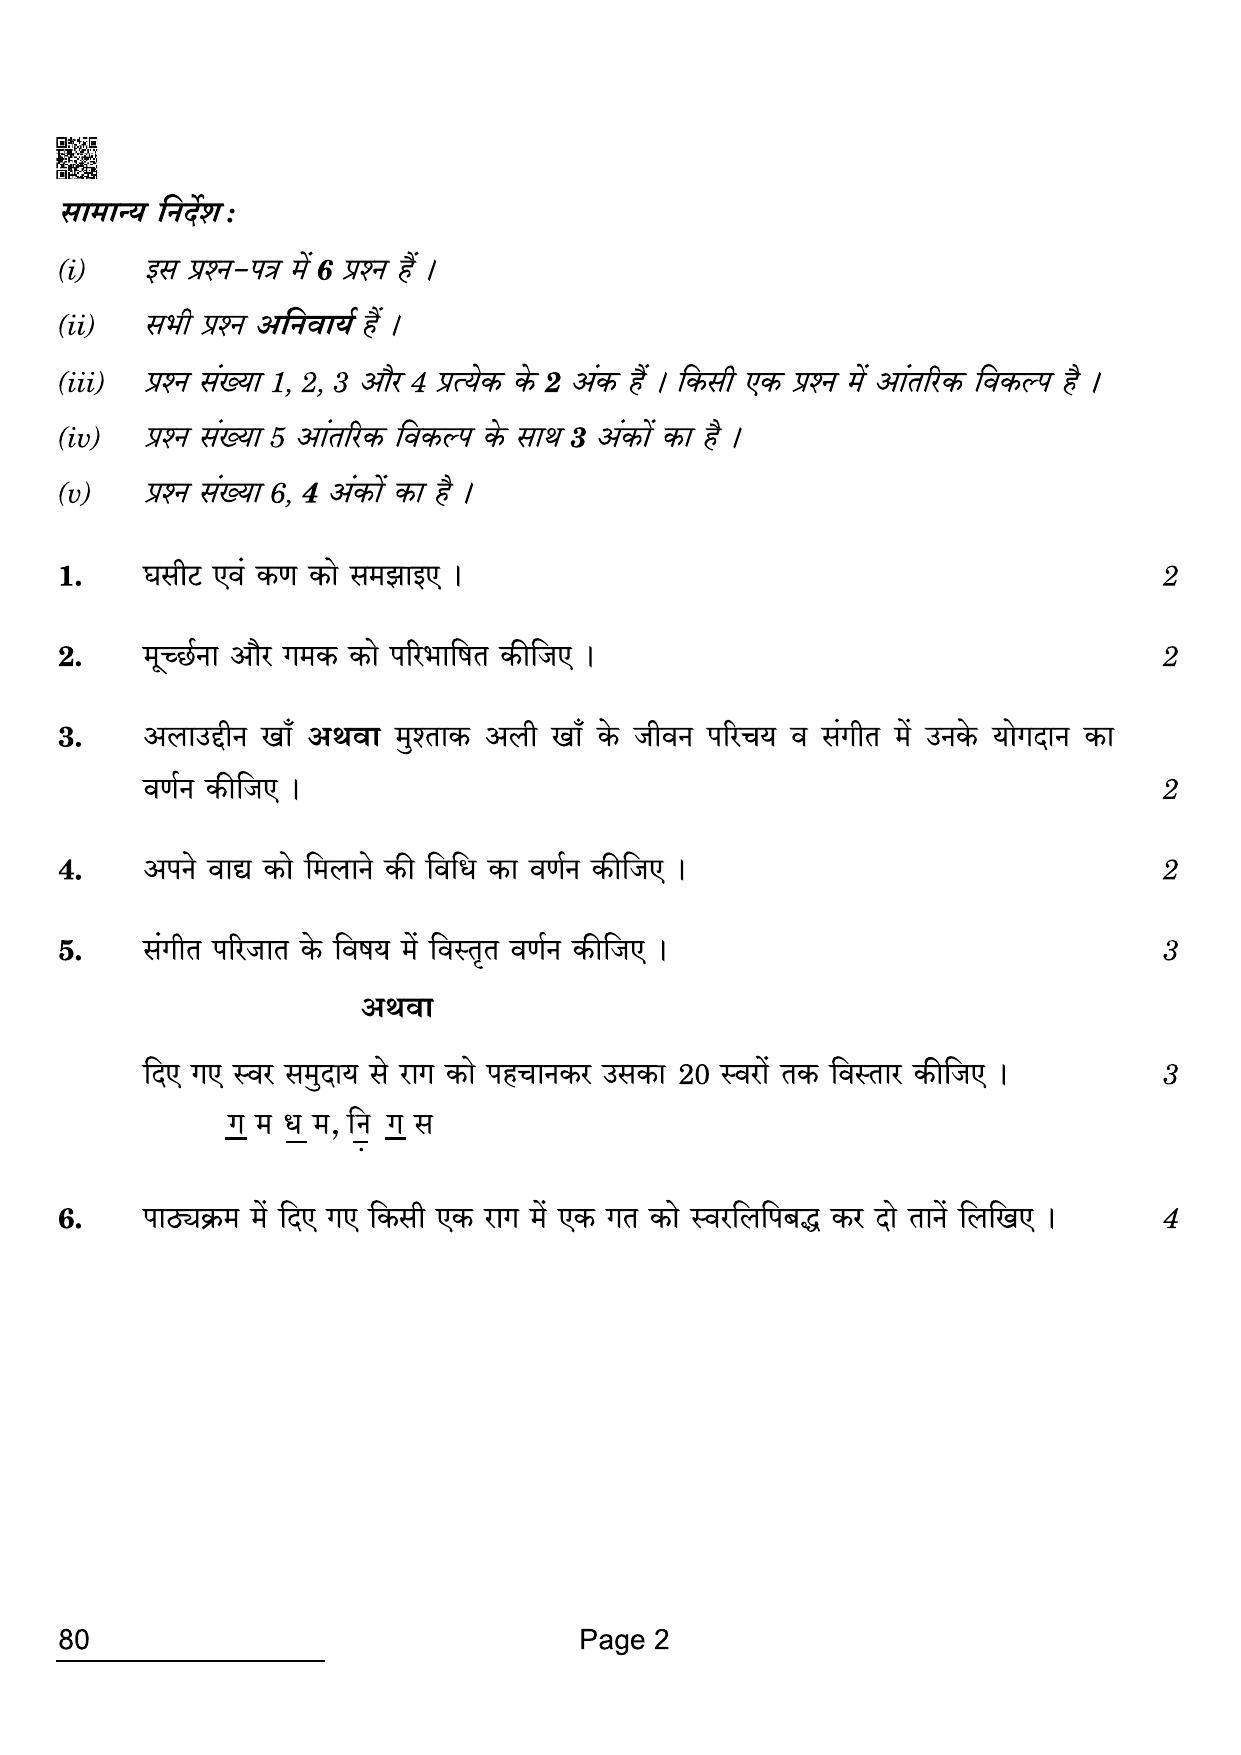 CBSE Class 12 80 Hindustani Music Melodic 2022 Compartment Question Paper - Page 2